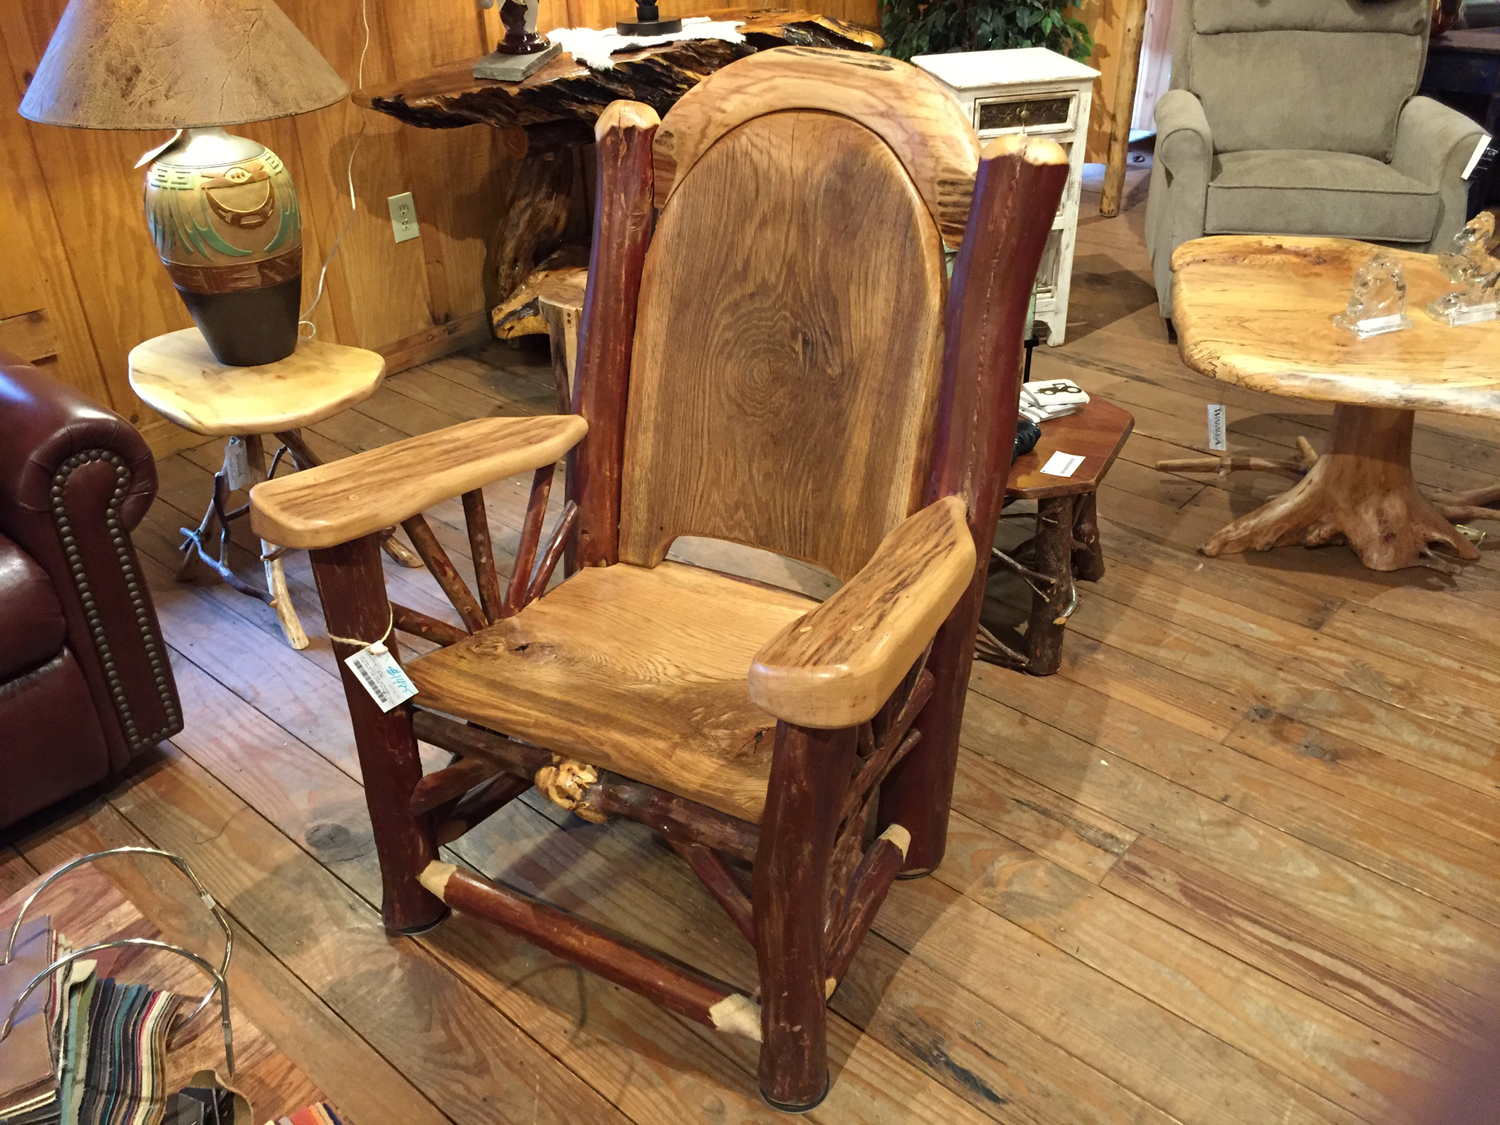 Oak Slab Hickory Arms and Headrest, Crepe Myrtle Logs Lounge Chair